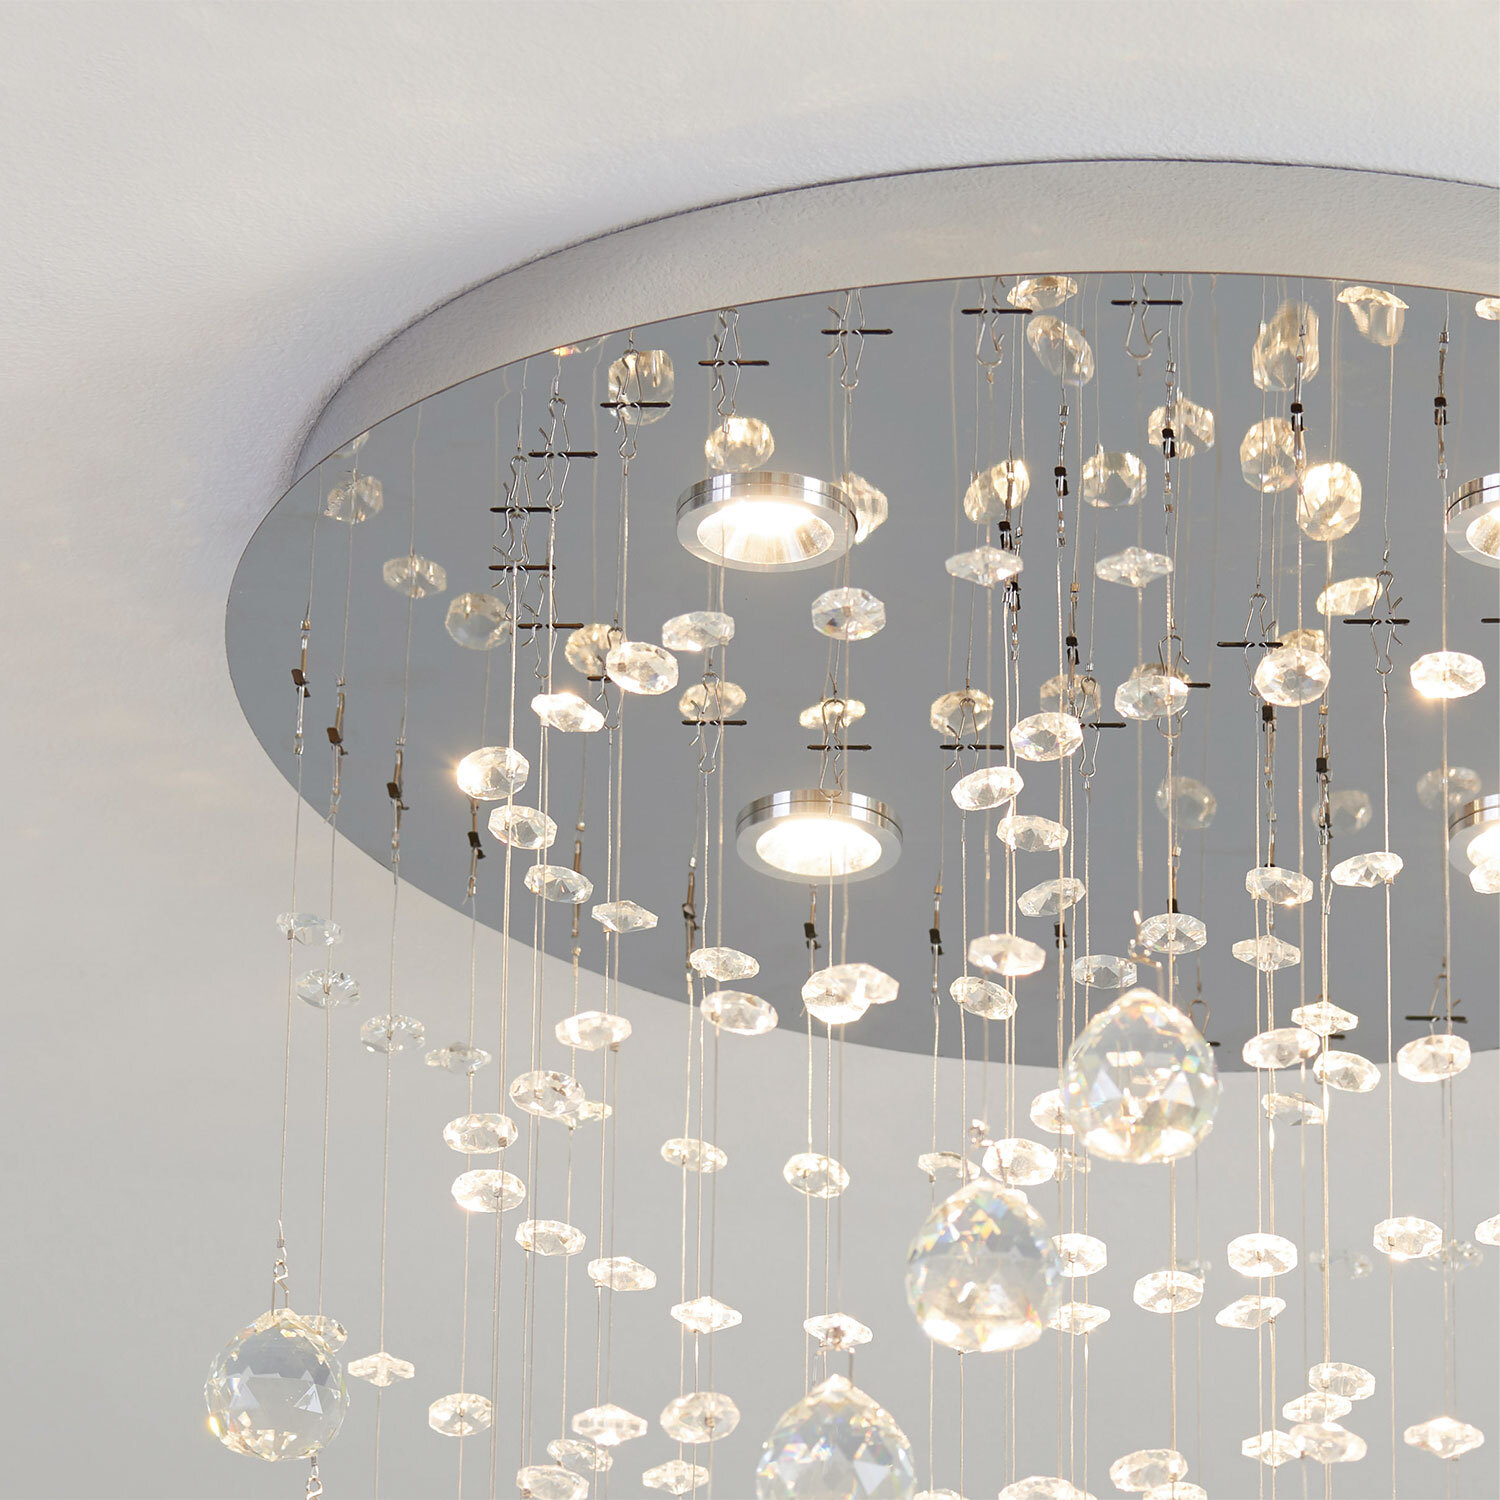 Razzle 78cm LED Droplet Ceiling Fitting Image 3